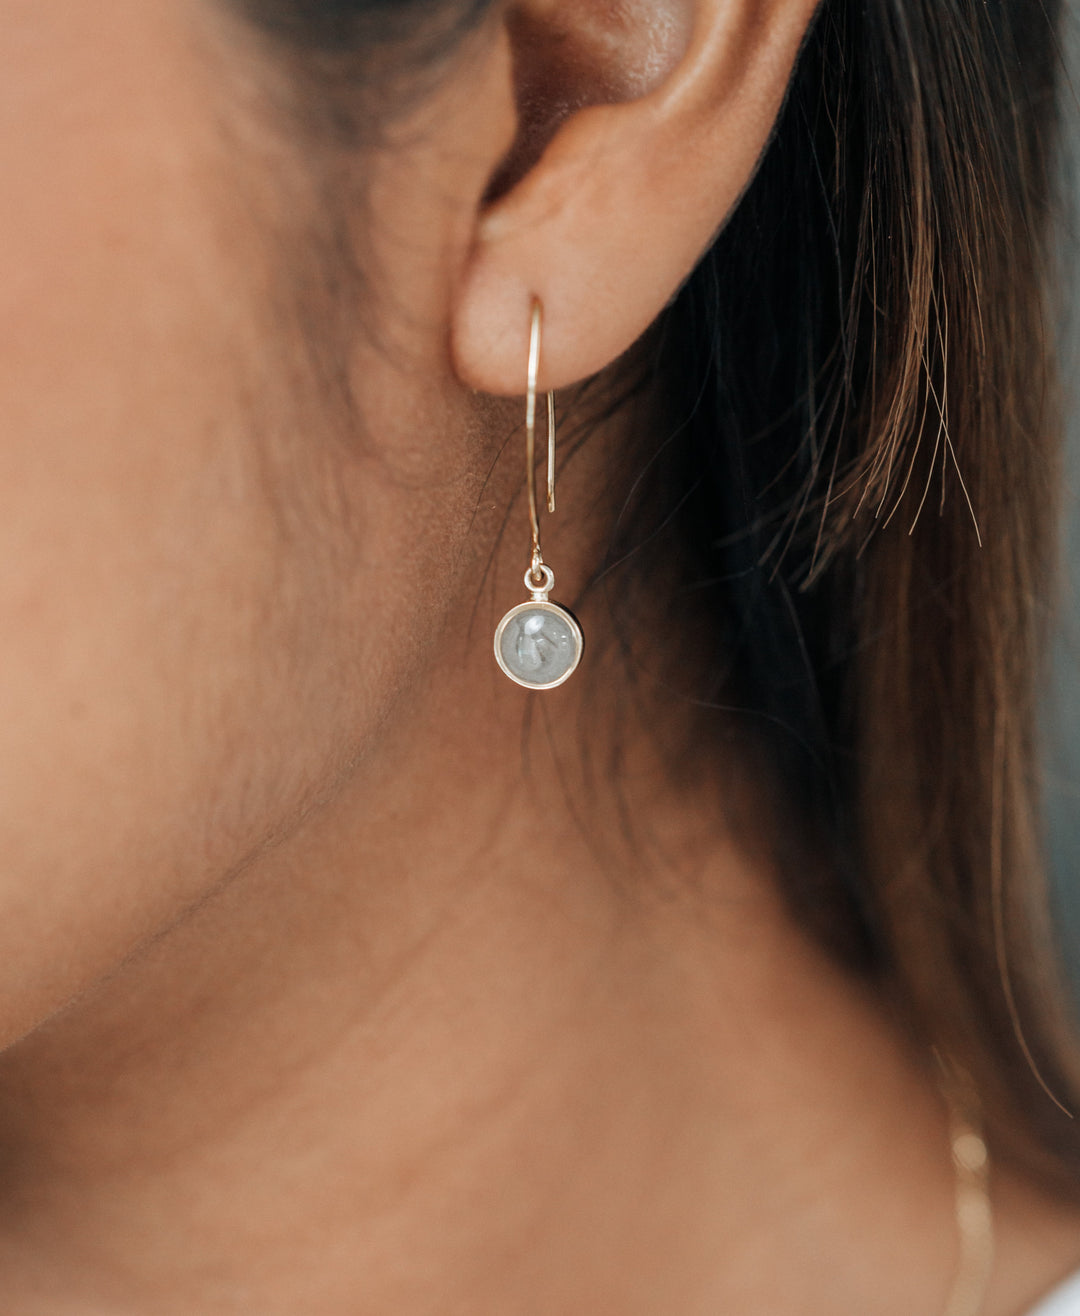 a close up showing a silver ashes earring with a dome setting and arched ear wire in a model's ear